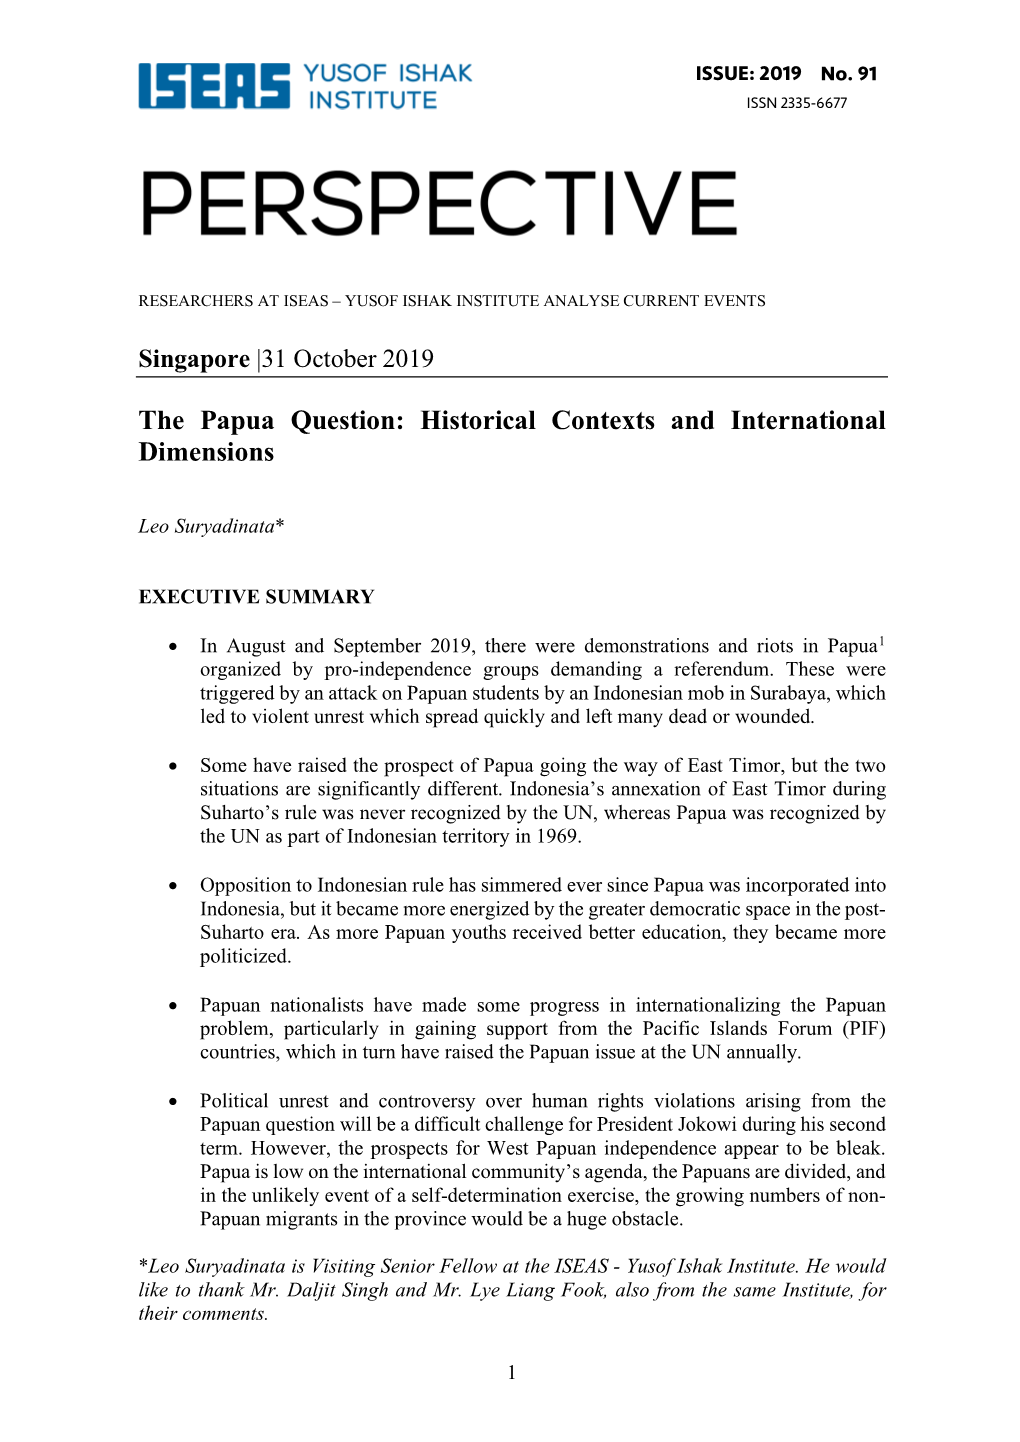 The Papua Question: Historical Contexts and International Dimensions